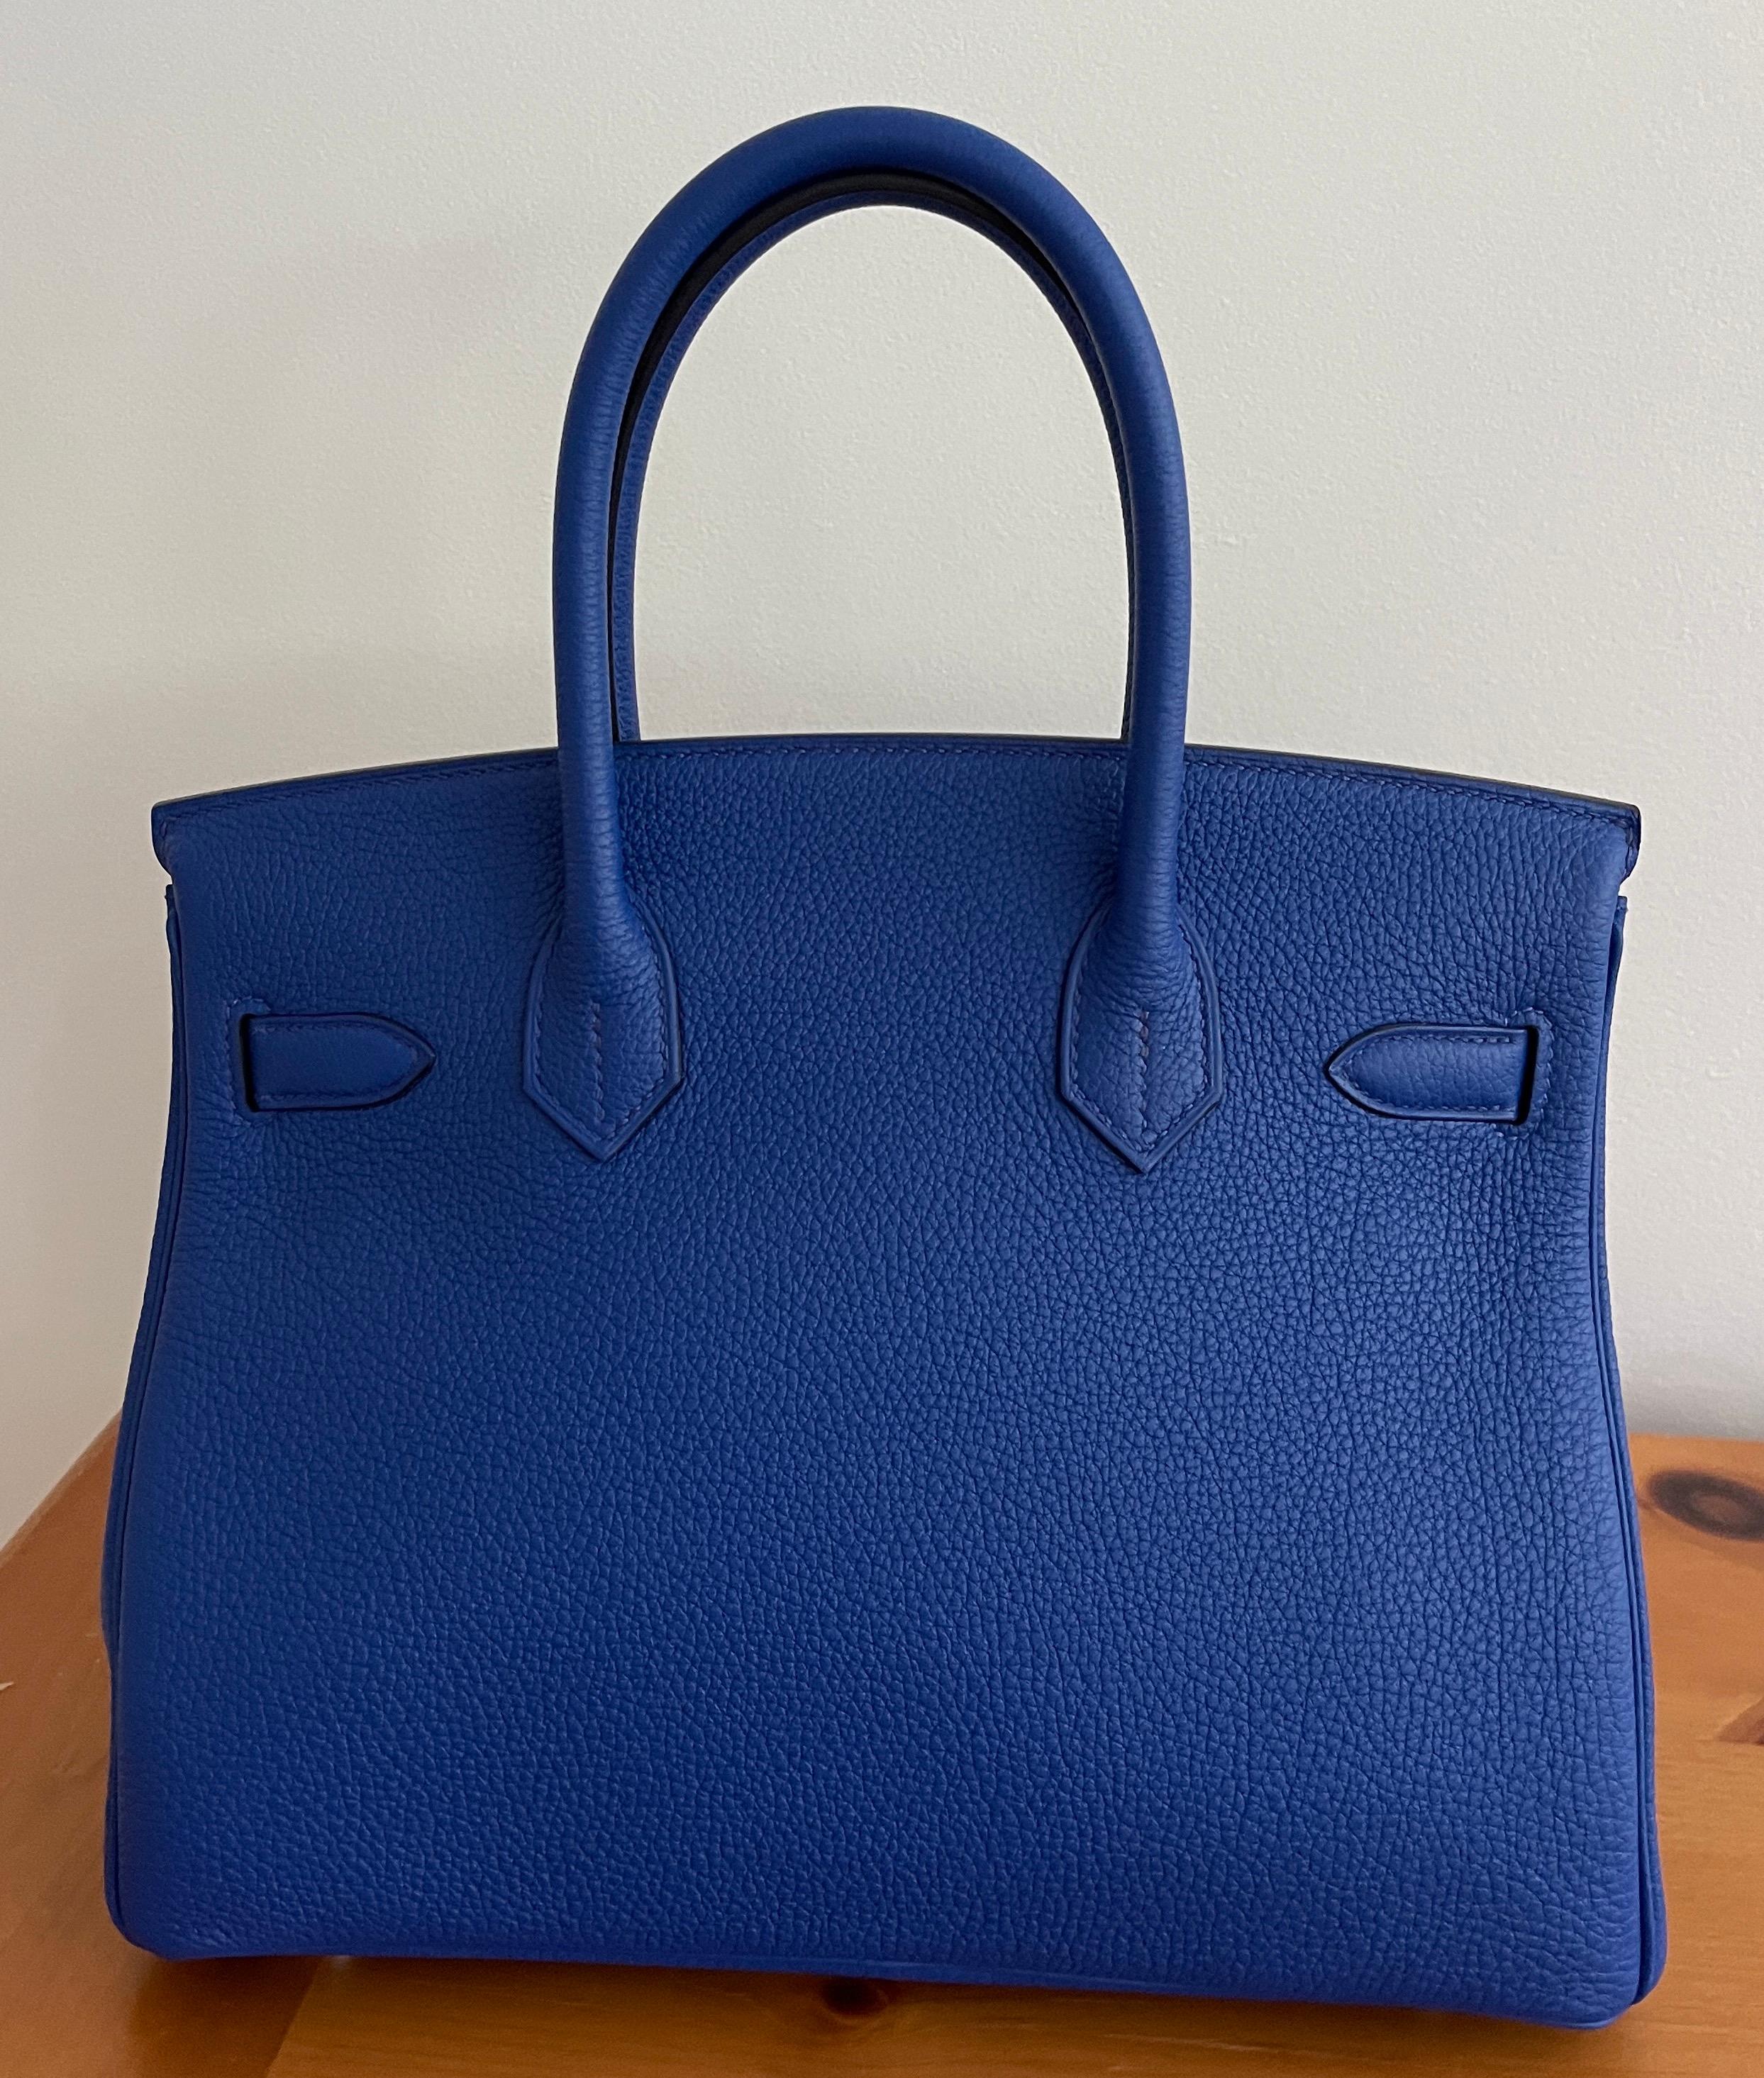 Hermes Birkin 30cm
Why wait when you can get it right now?
Blue Royal is a new color introduced in 2022
Togo Leather, loved by all because it is so durable, scratch resistant
Palladium Hardware
Tonal Stitching
Collection: U
2022
Interior zipper